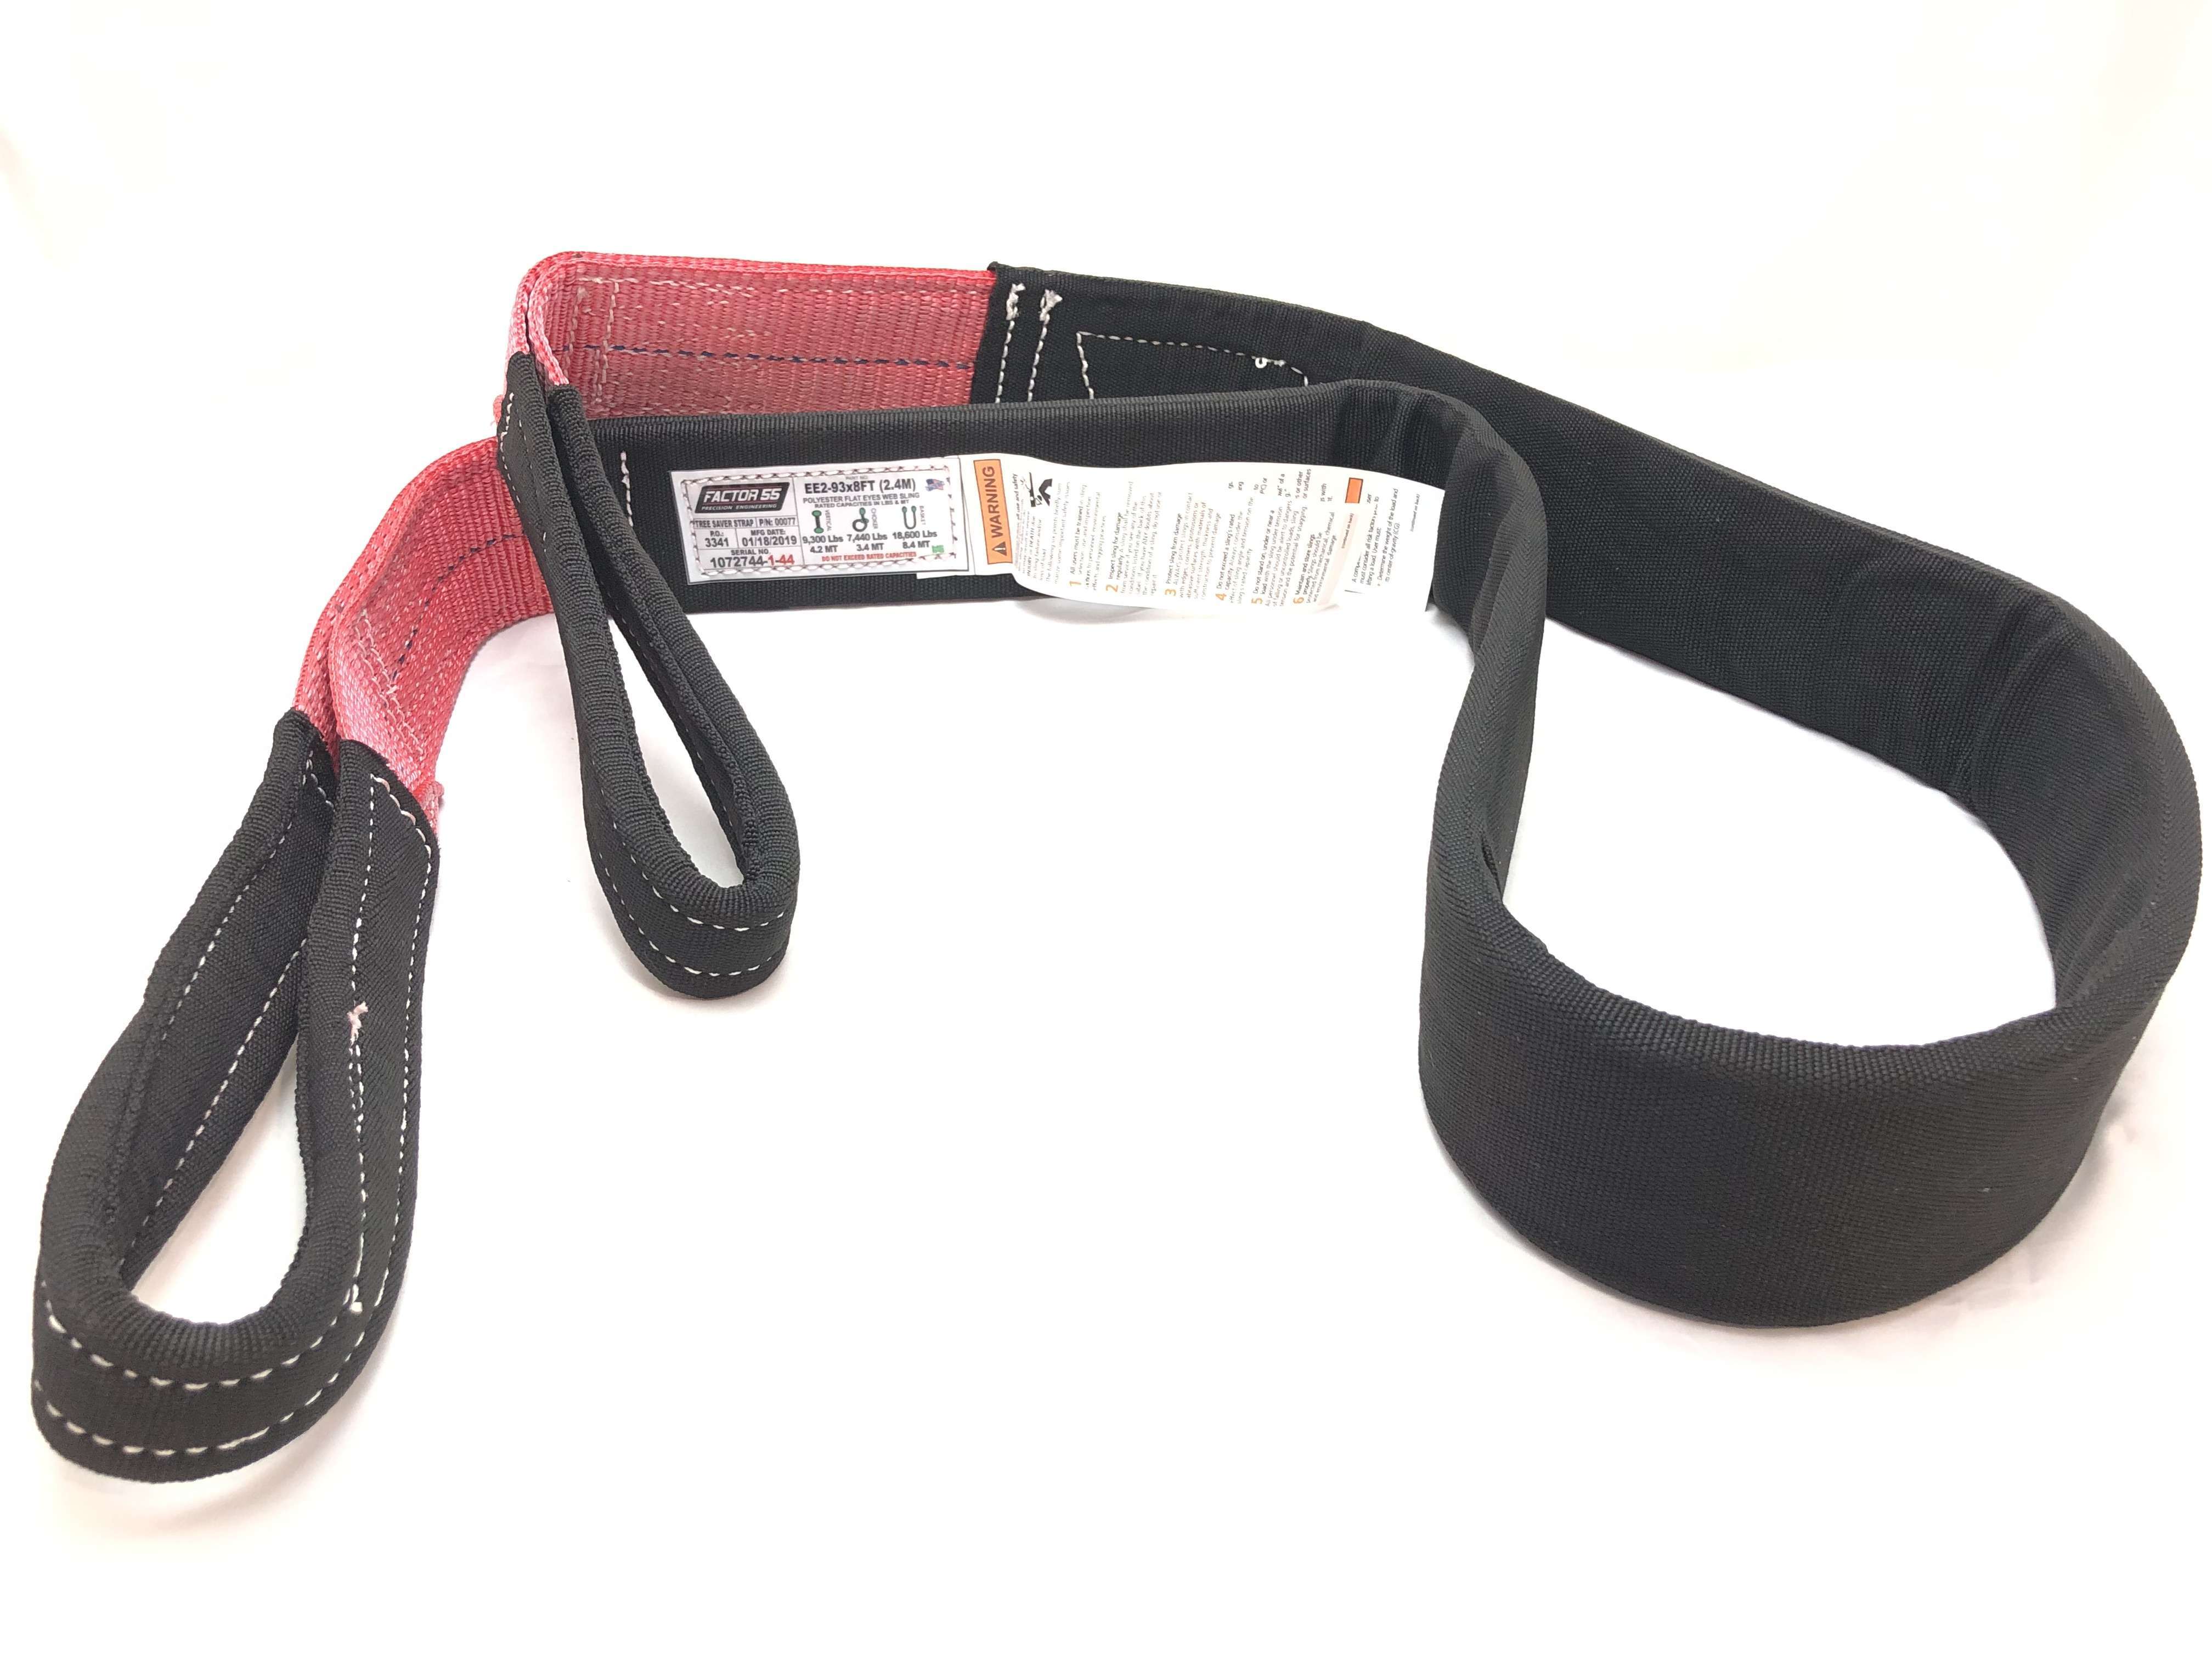 Tree Saver Strap Recovery Accessories Factor 55 display